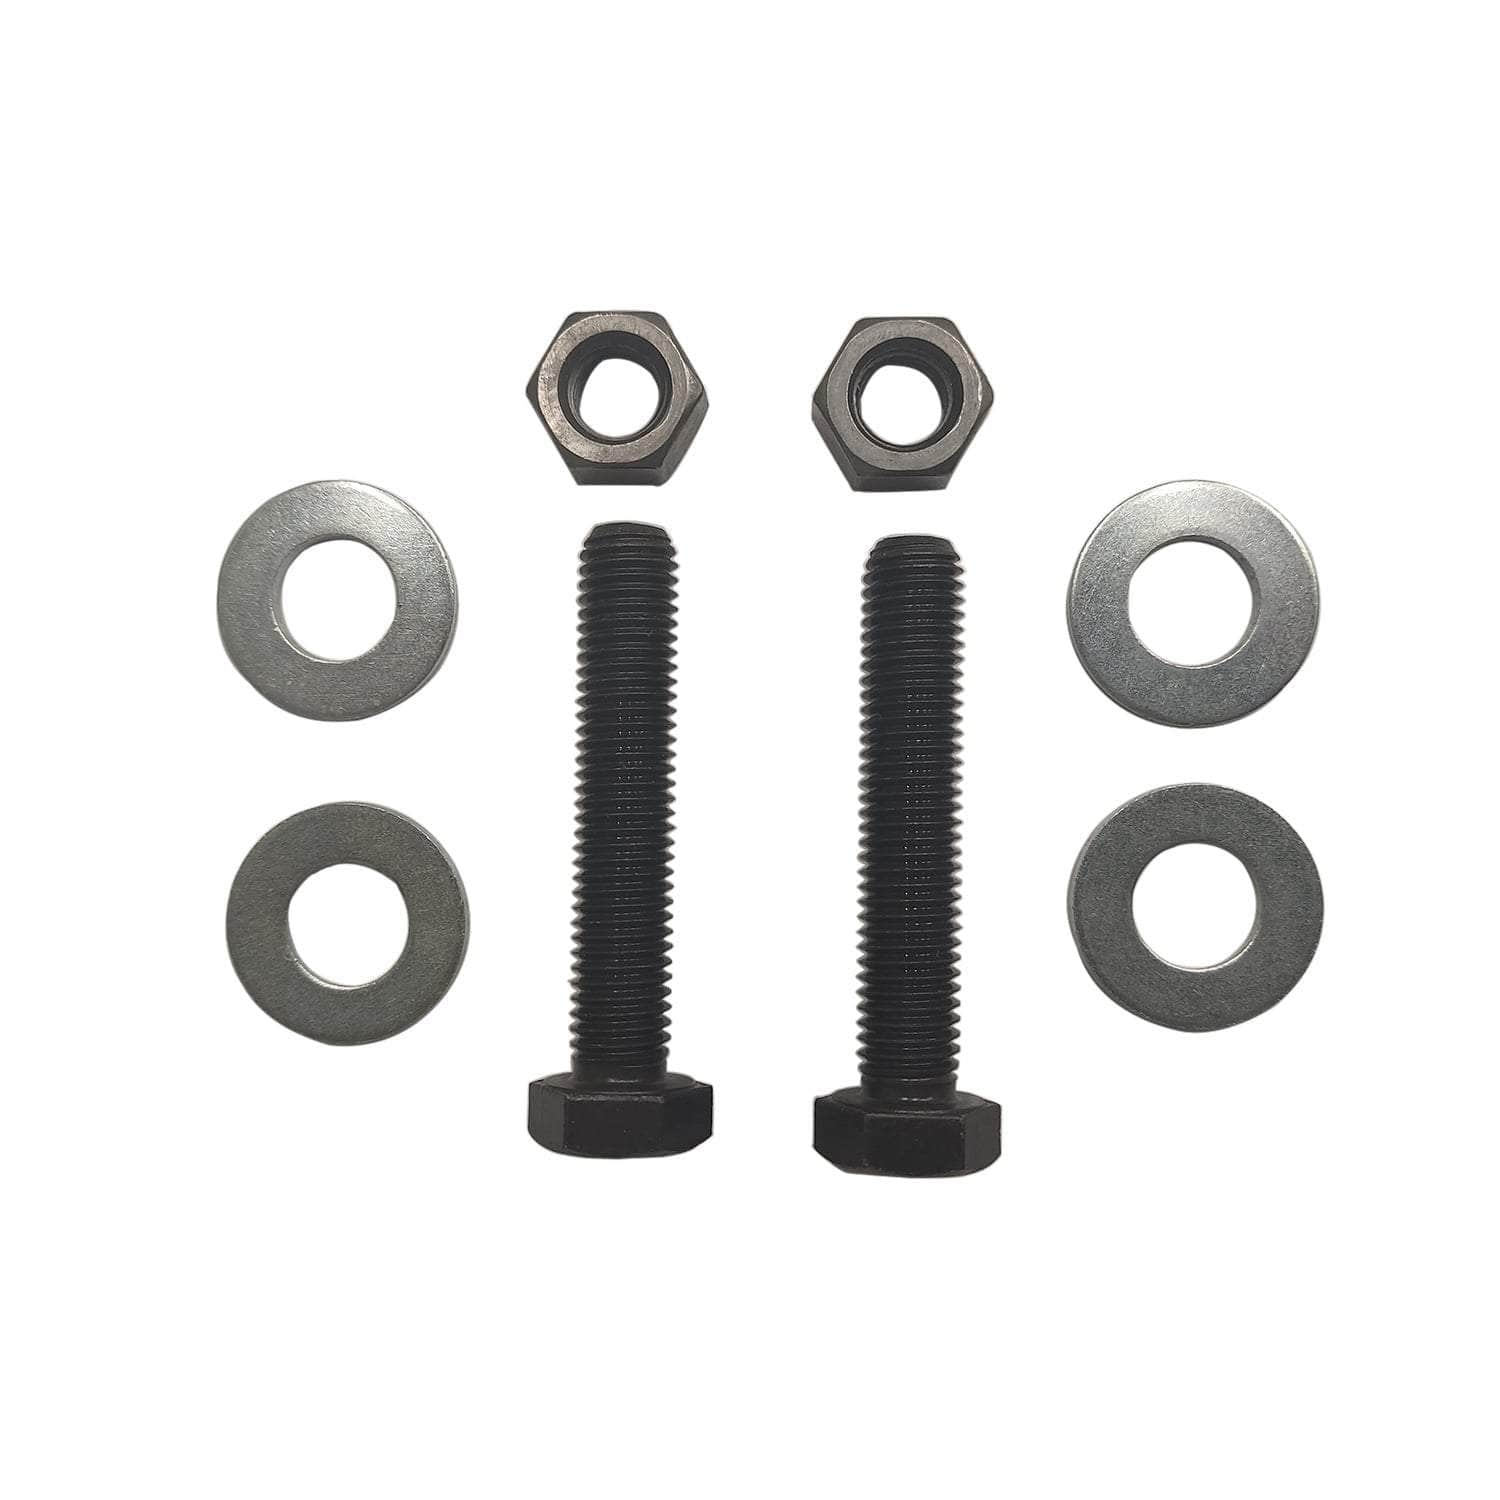 Barrel to Oven M12 Bolts, Nuts & Washers (pair) for use with Aga range cookers